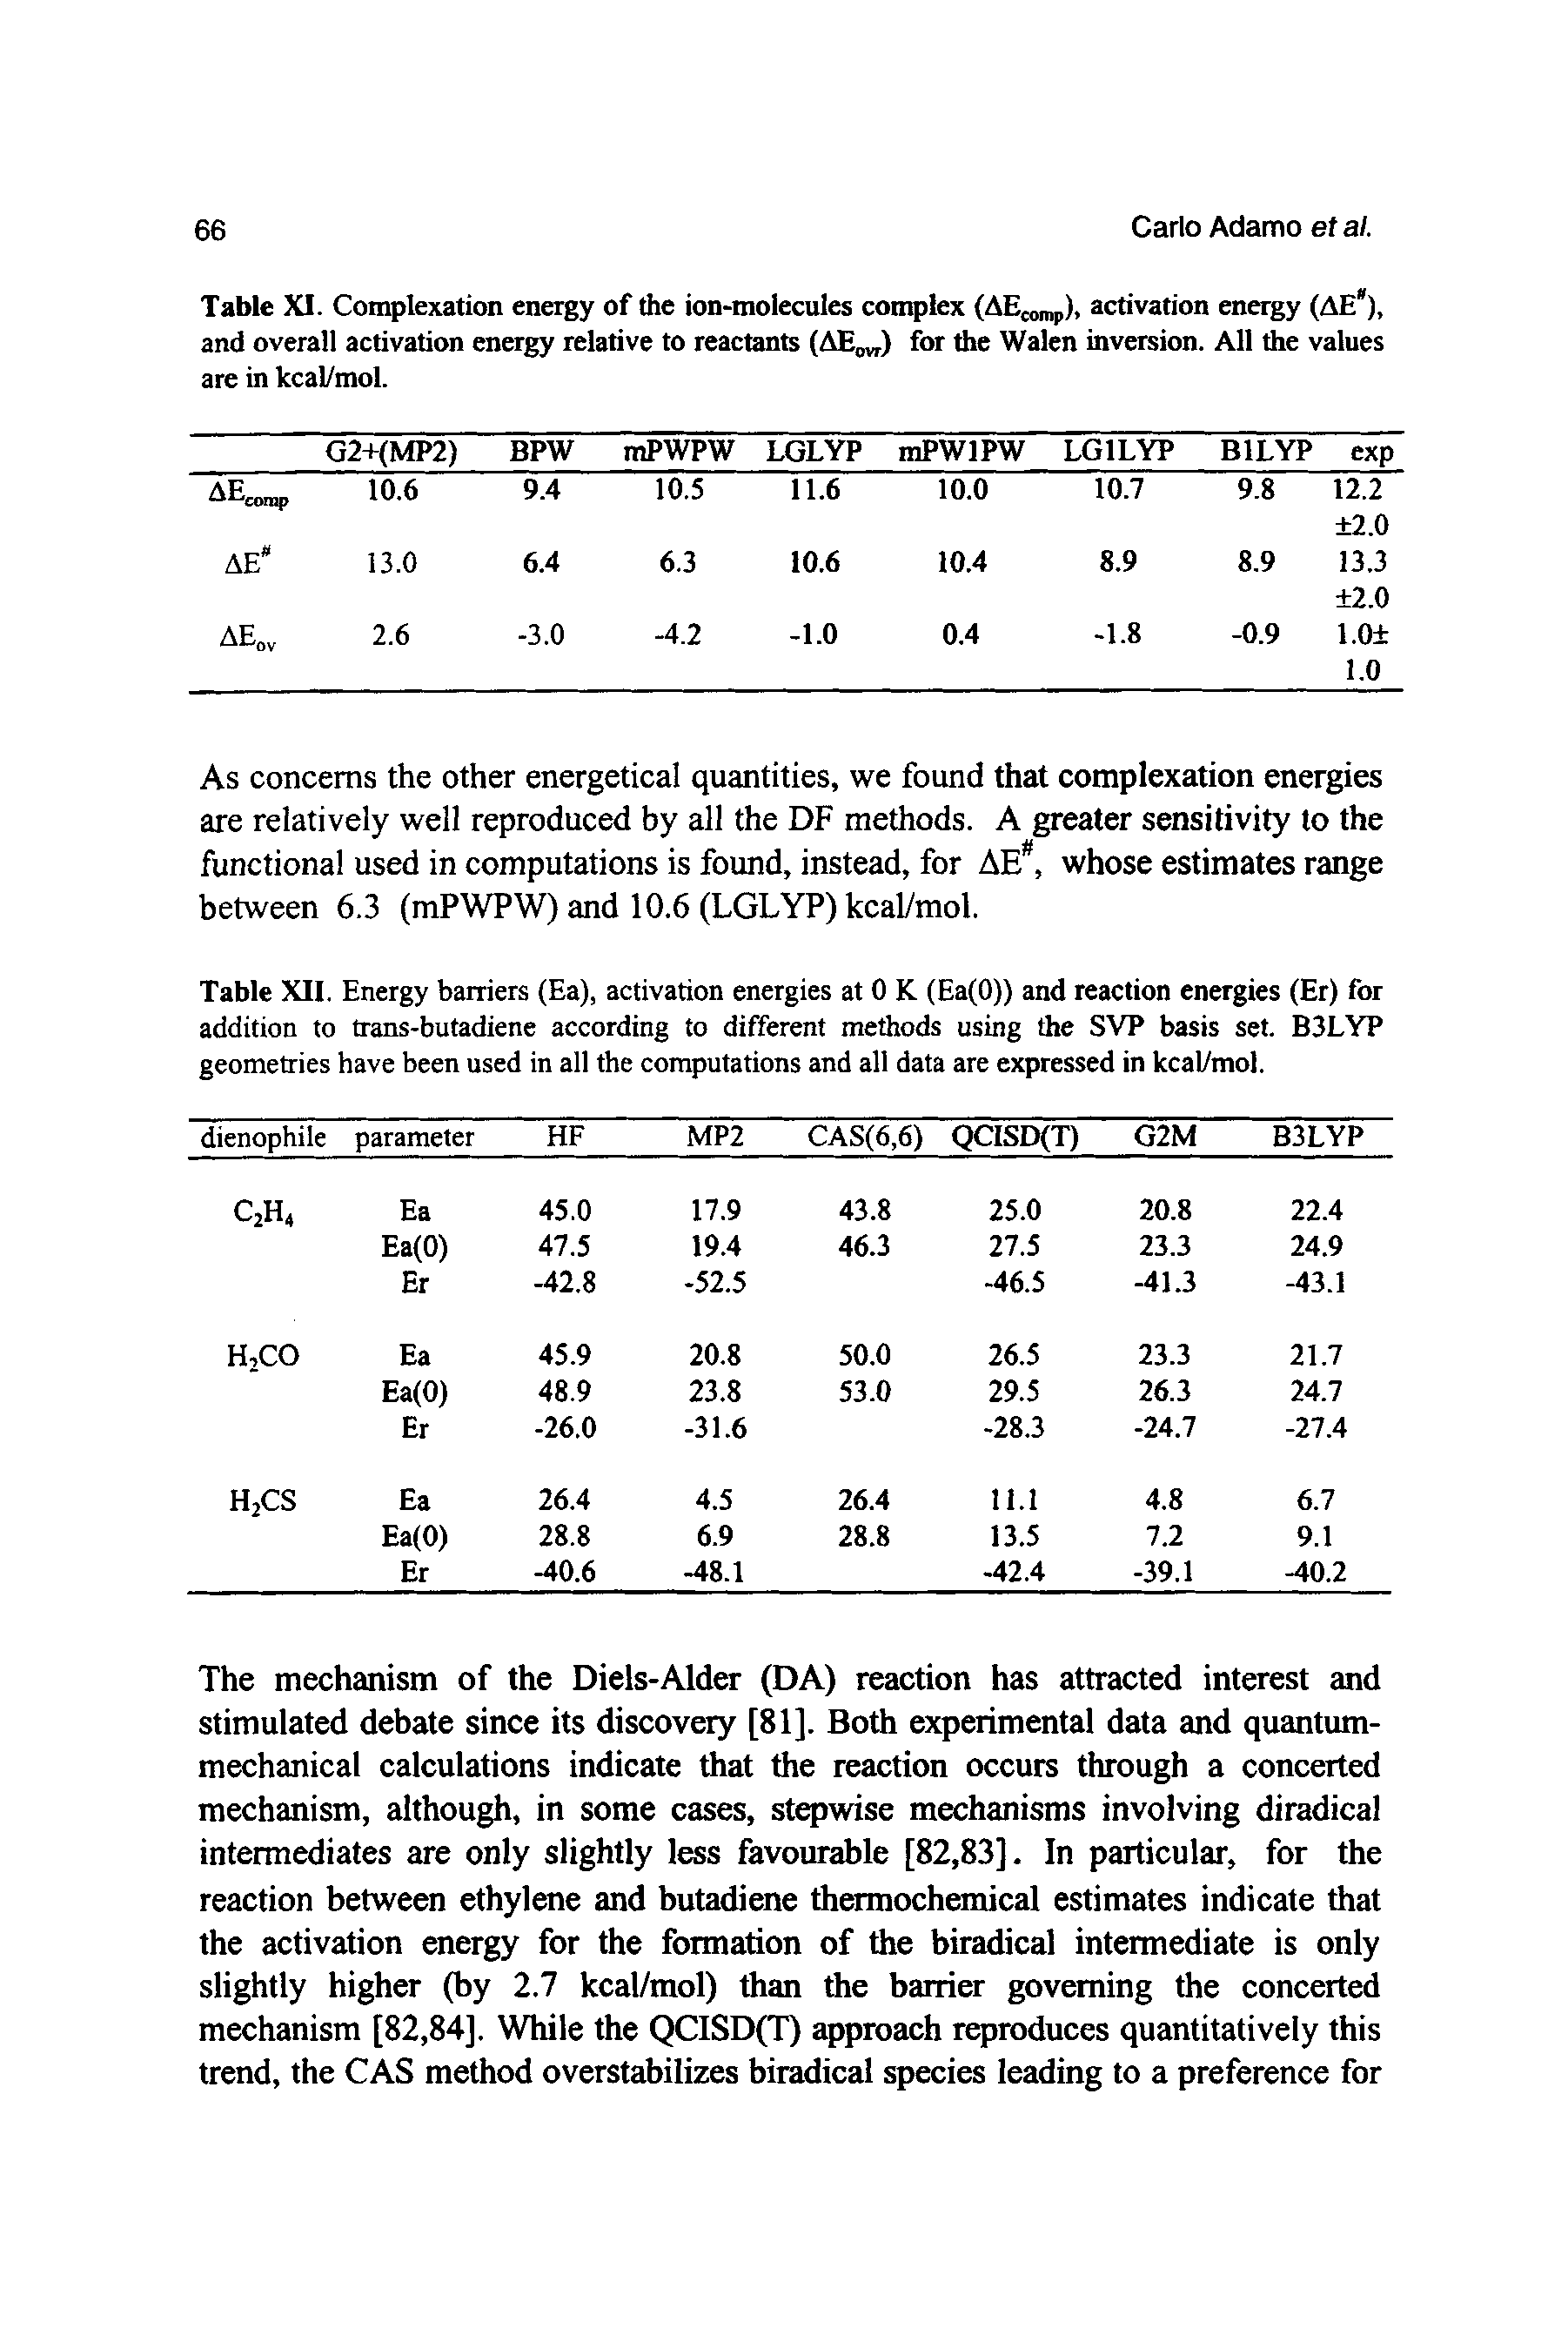 Table XI. Complexation energy of the ion-tnoiecules complex (AEcomp), activation energy (AE ), and overall activation energy relative to reactants (AE ) for the Walen inversion. All the values are in kcal/mol.